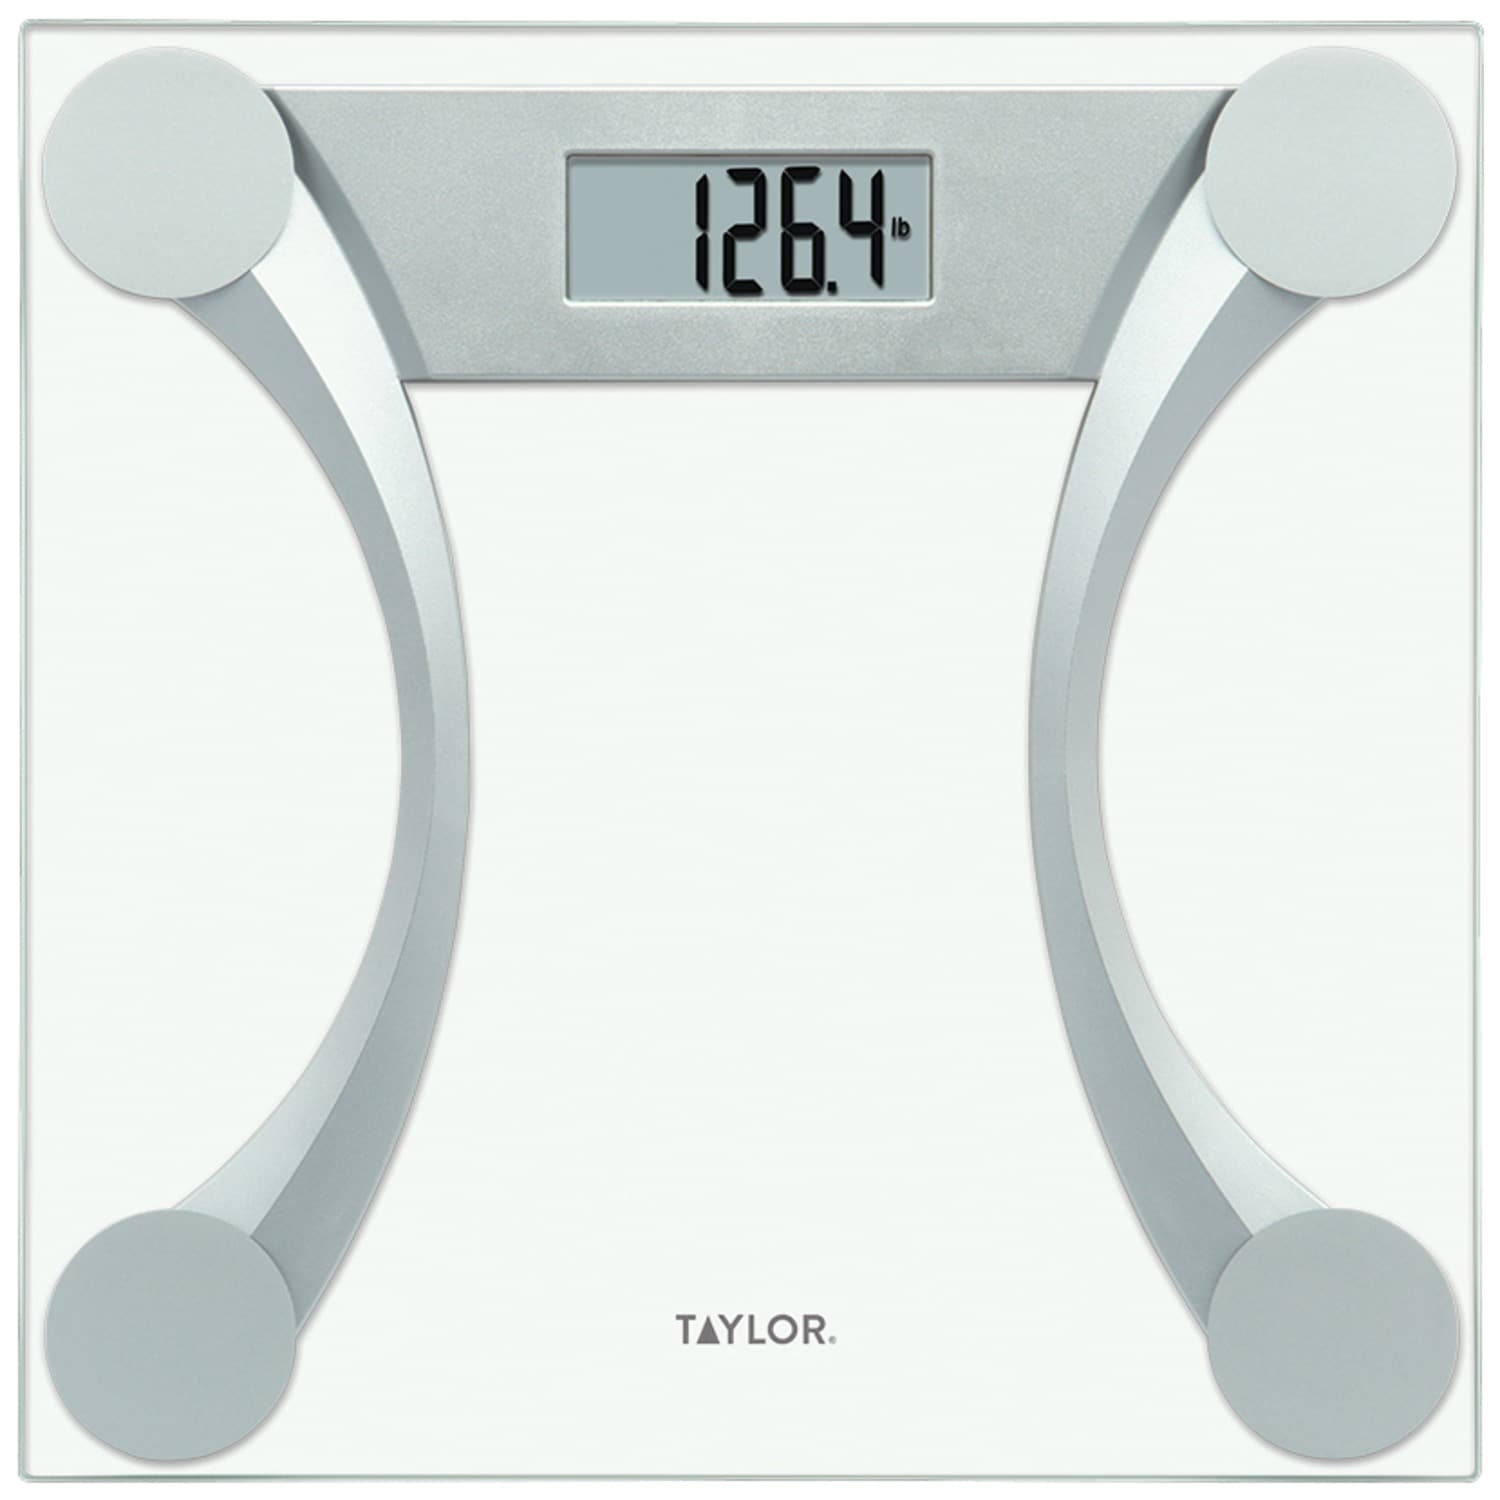 Taylor Weight Tracking LCD Glass Body Weight Scale Battey Powered, 440lb  Capacity